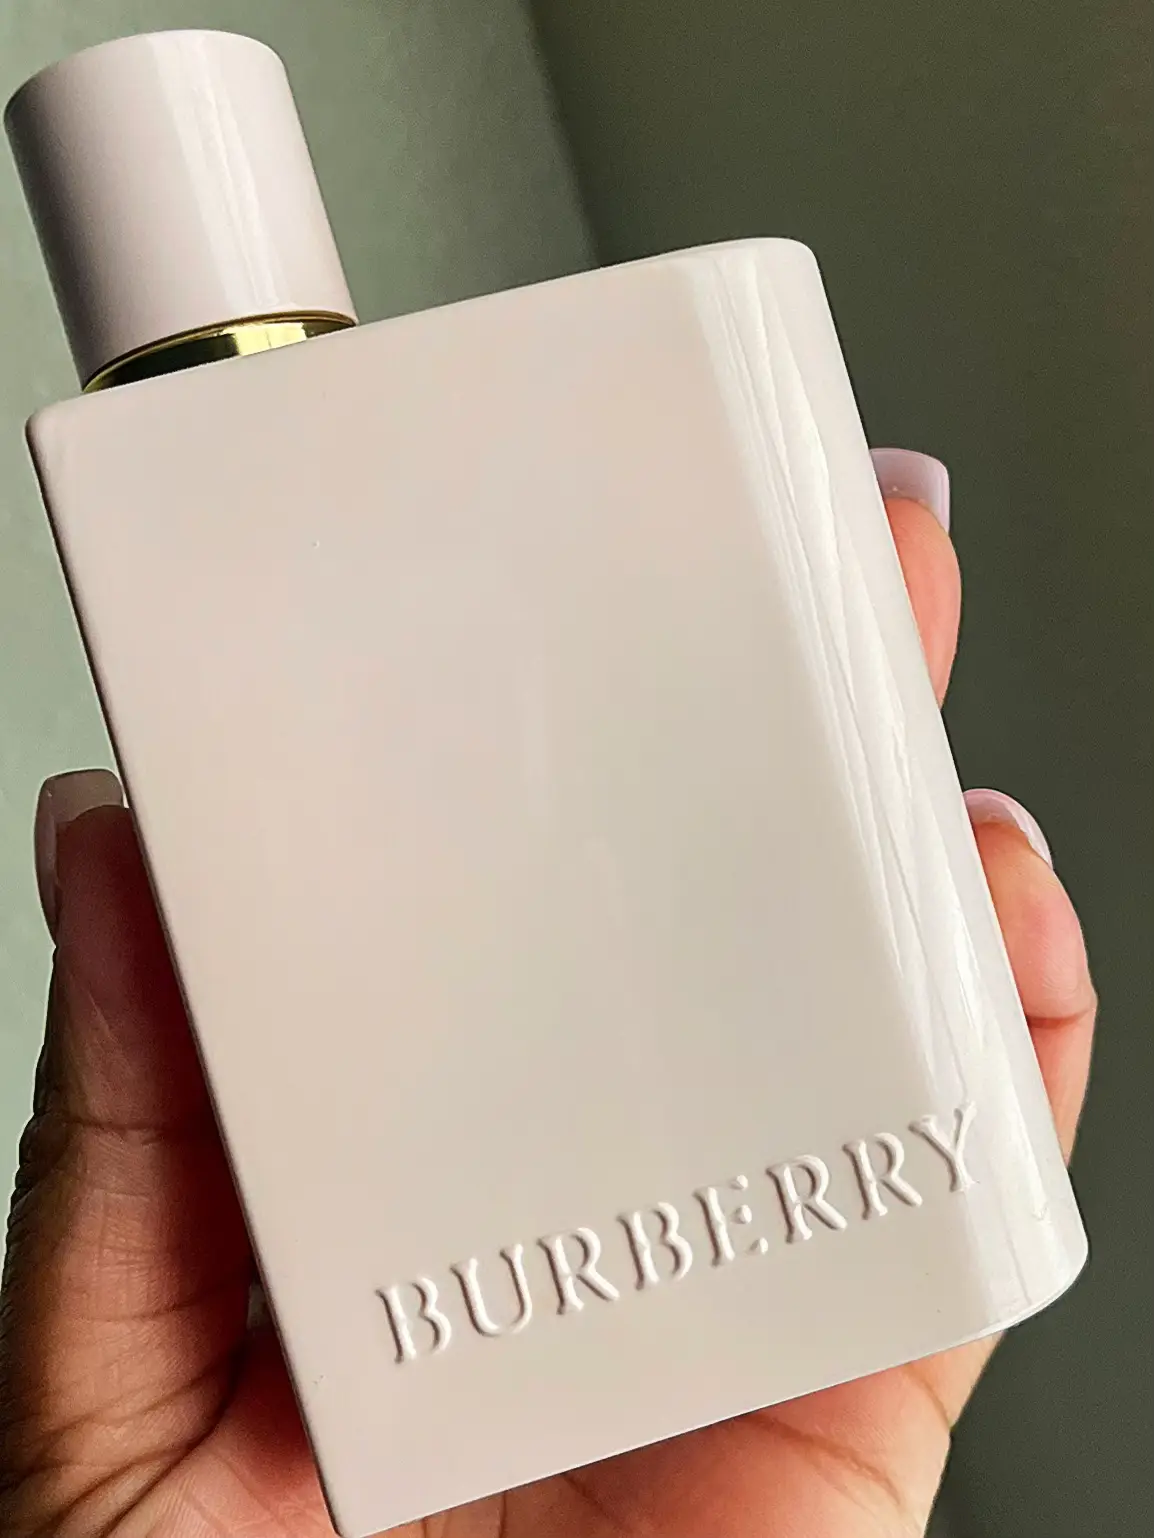 Mini Perfume Dump! 1. Burberry  Gallery posted by Veronica Hale